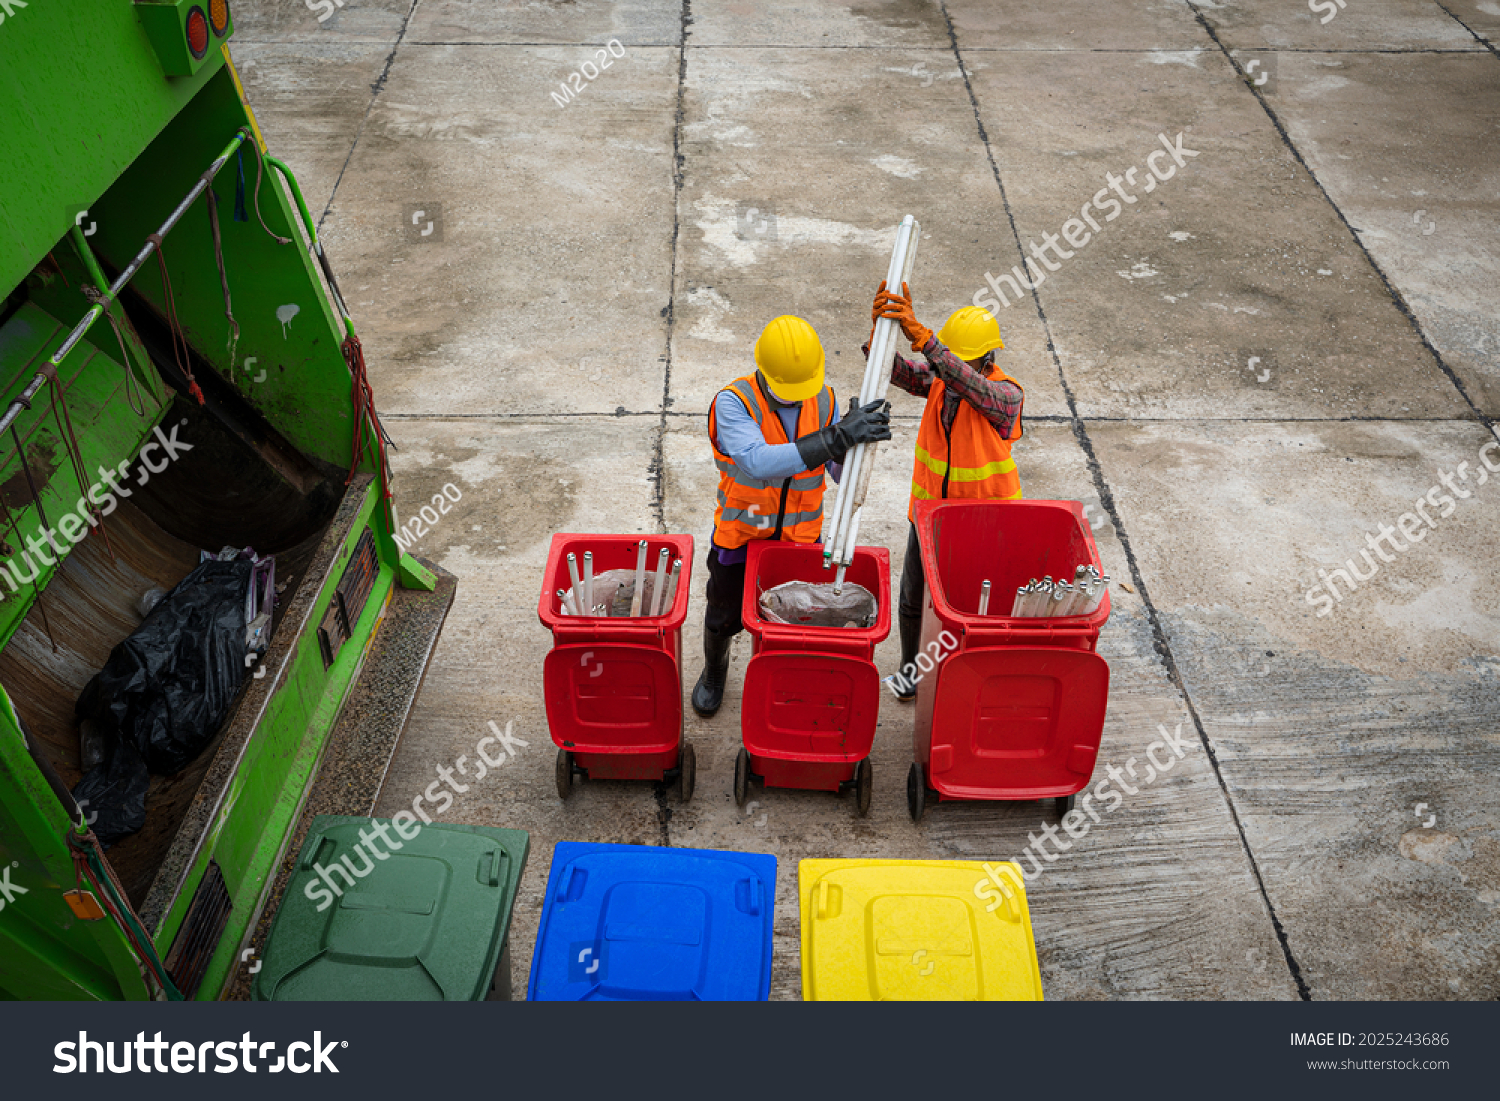 Rubbish cleaner man working with green garbage truck loading waste and trash bin at city,Waste collectors at work,Top view. #2025243686